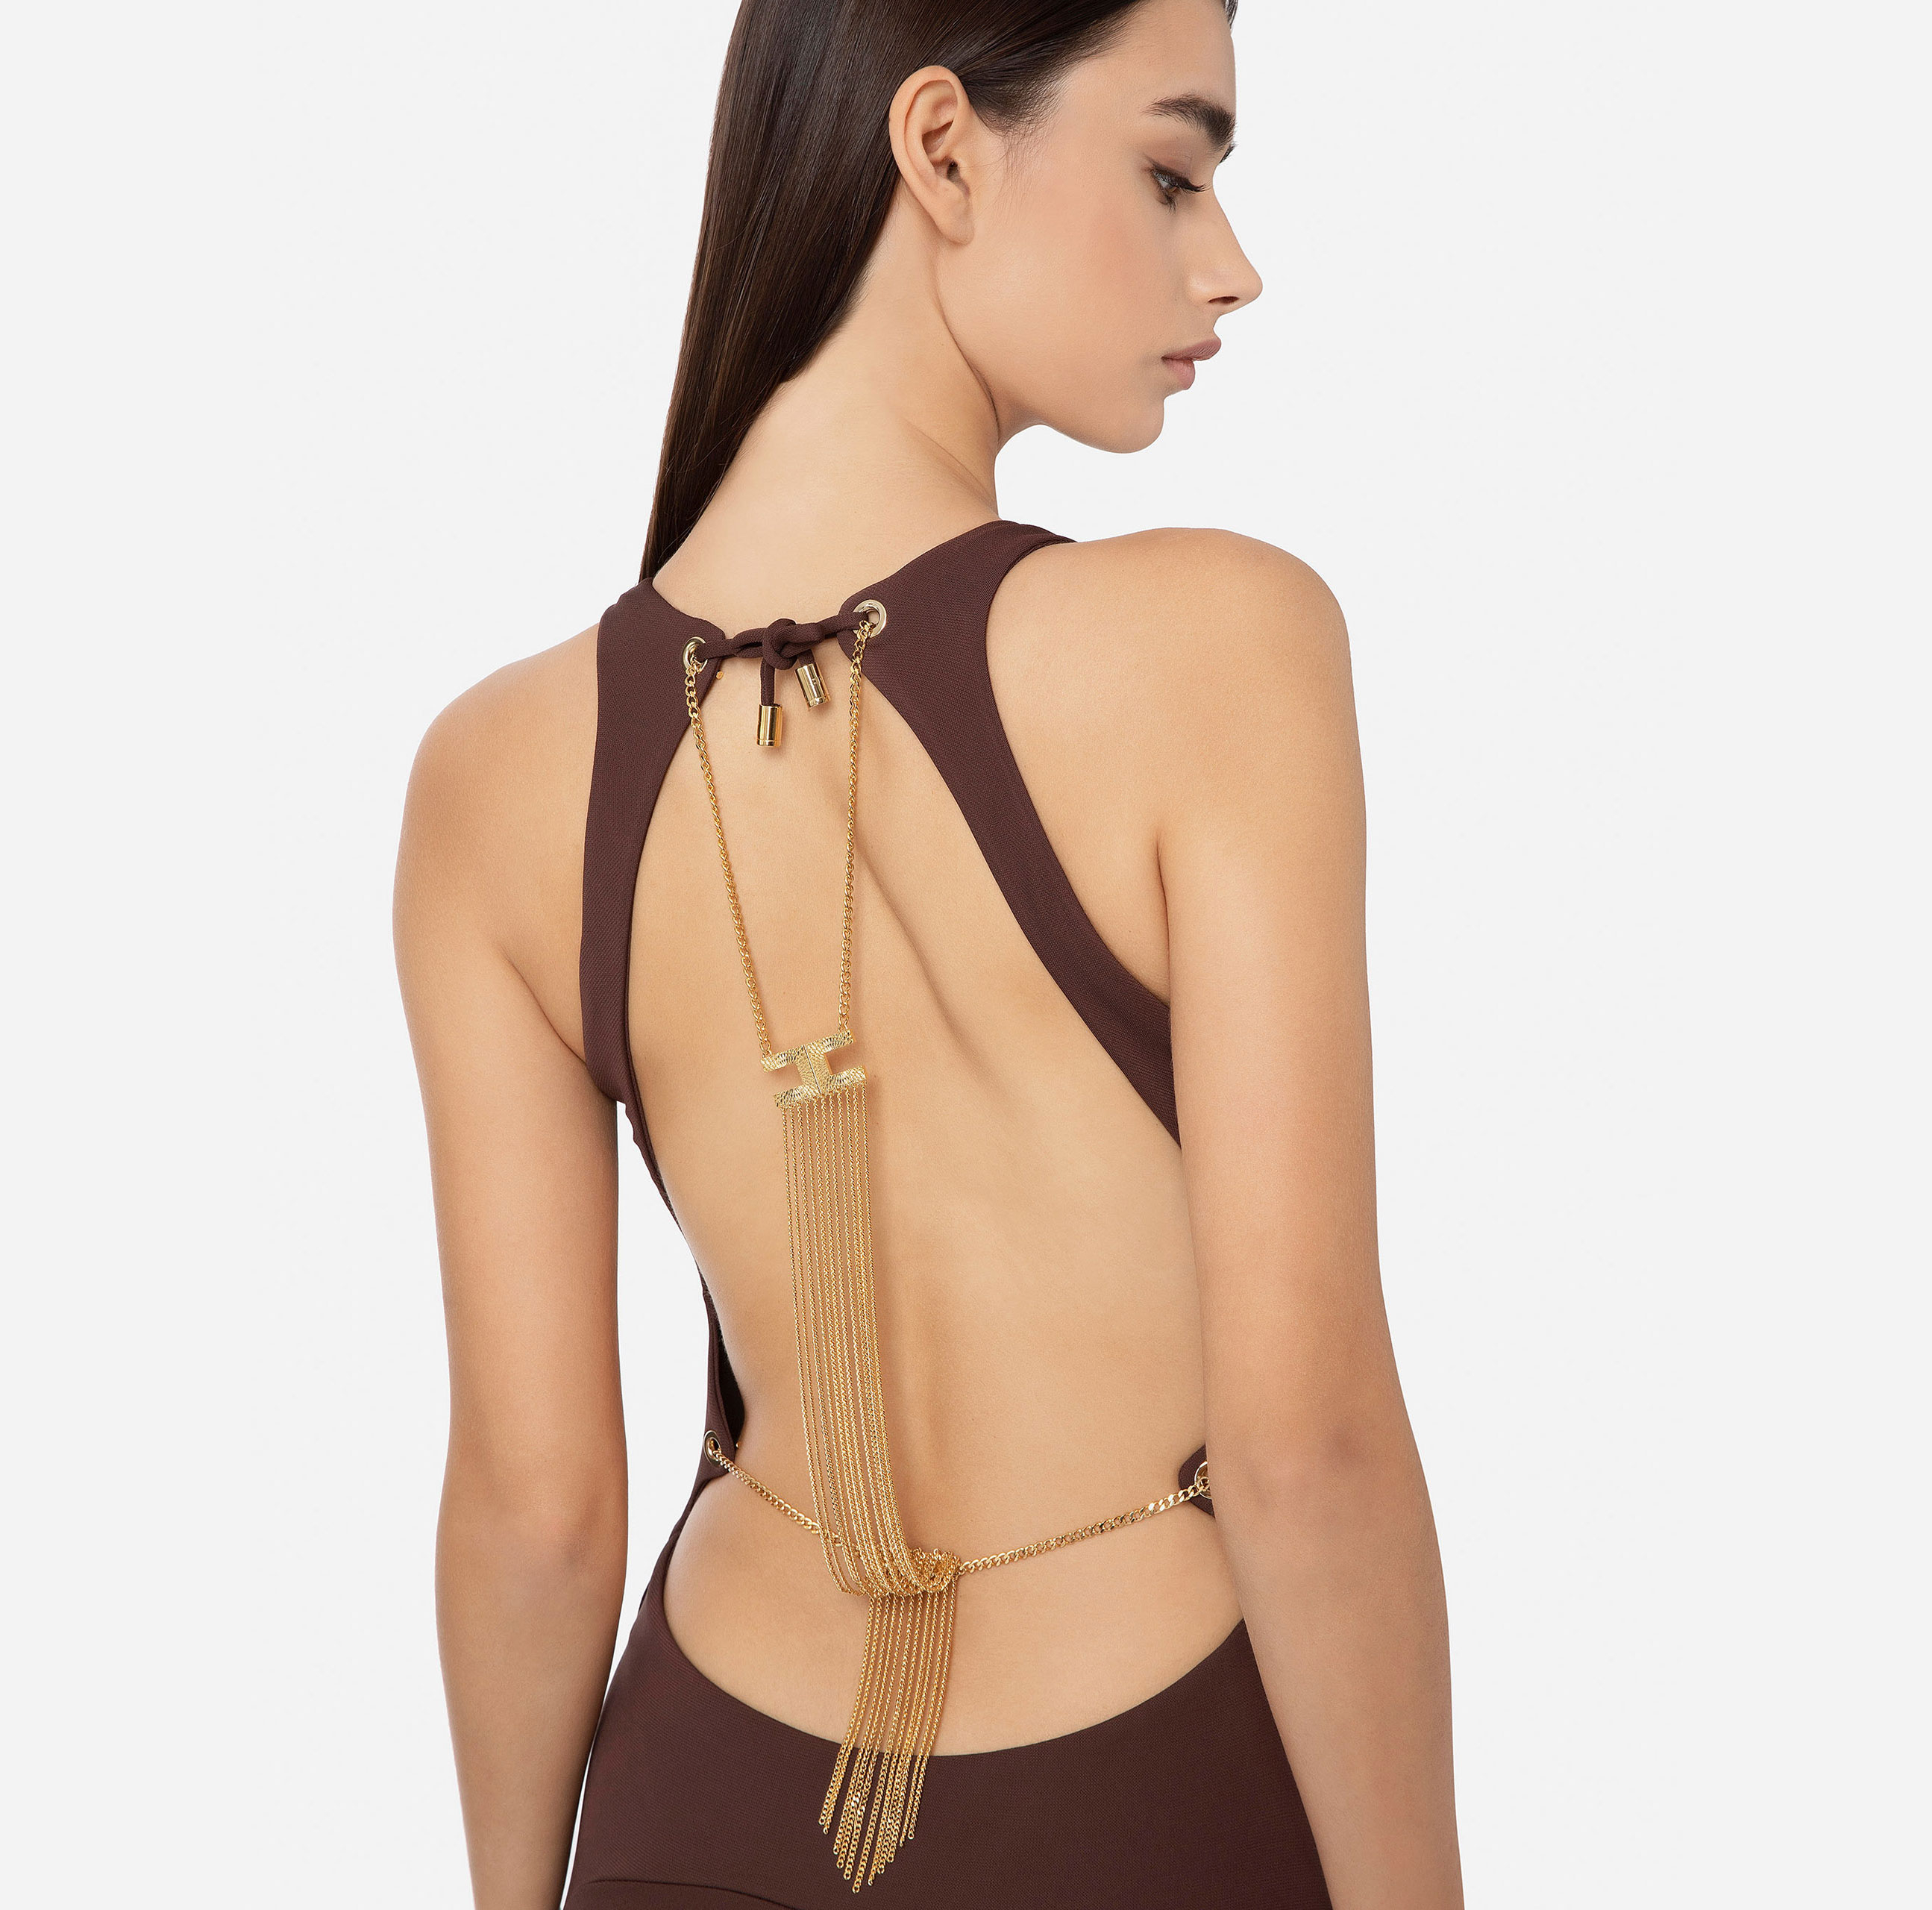 Red carpet dress in jersey with neckline on the back - Elisabetta Franchi